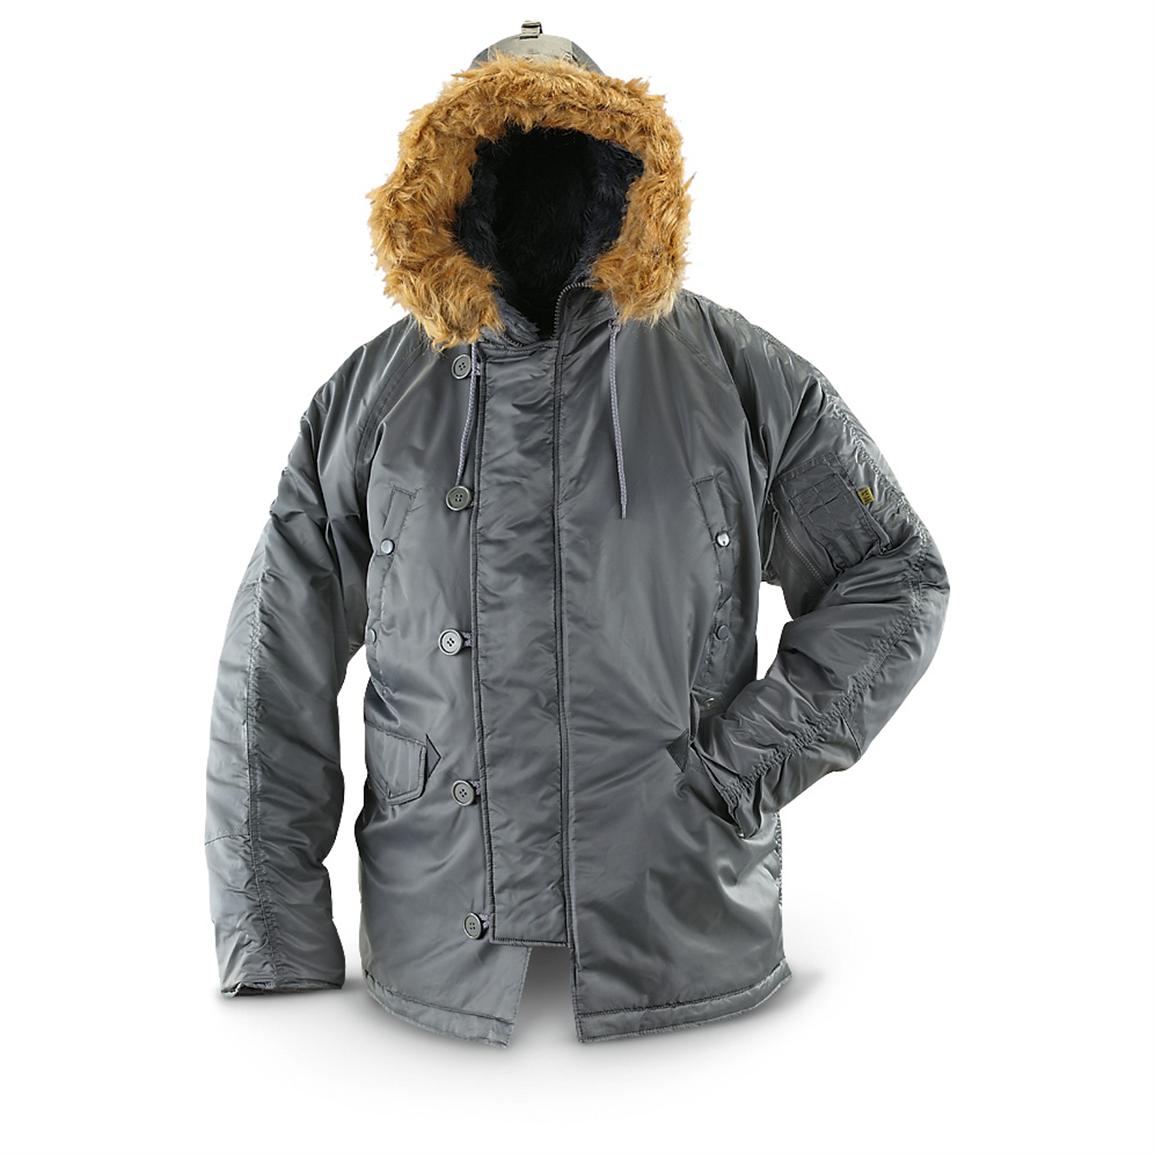 Knox Armory N3B Parka - 164590, Tactical Clothing at Sportsman's Guide